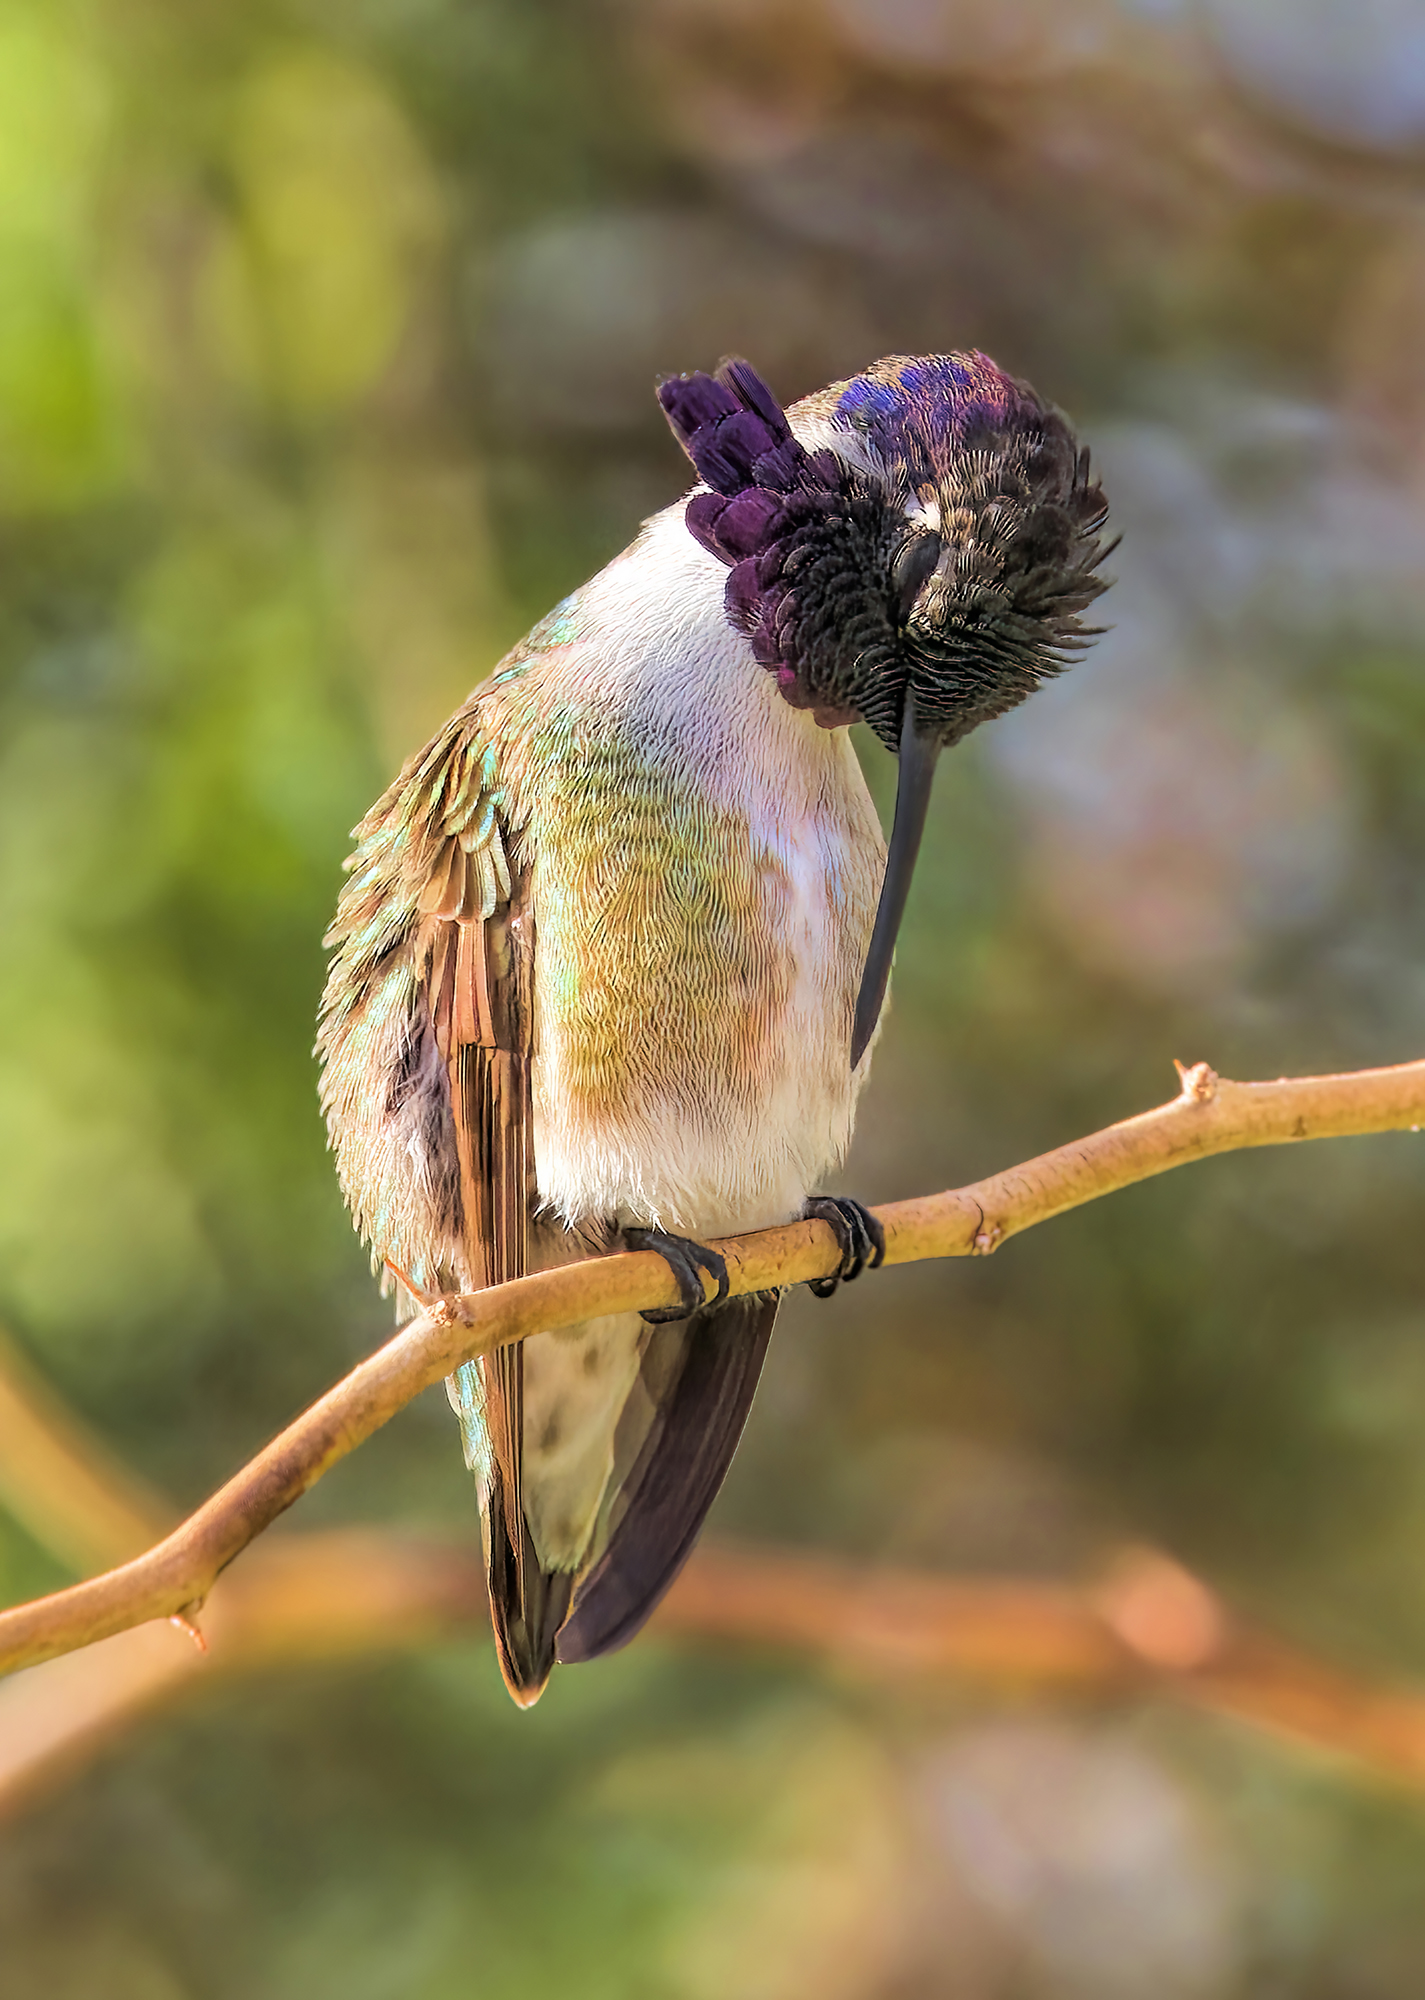 Photo by Harry Dennis Taylor Jr  |  "Head Bowed in Hummingbird Prayer" - Local hummingbird photographed in our backyard area on a rainy day.